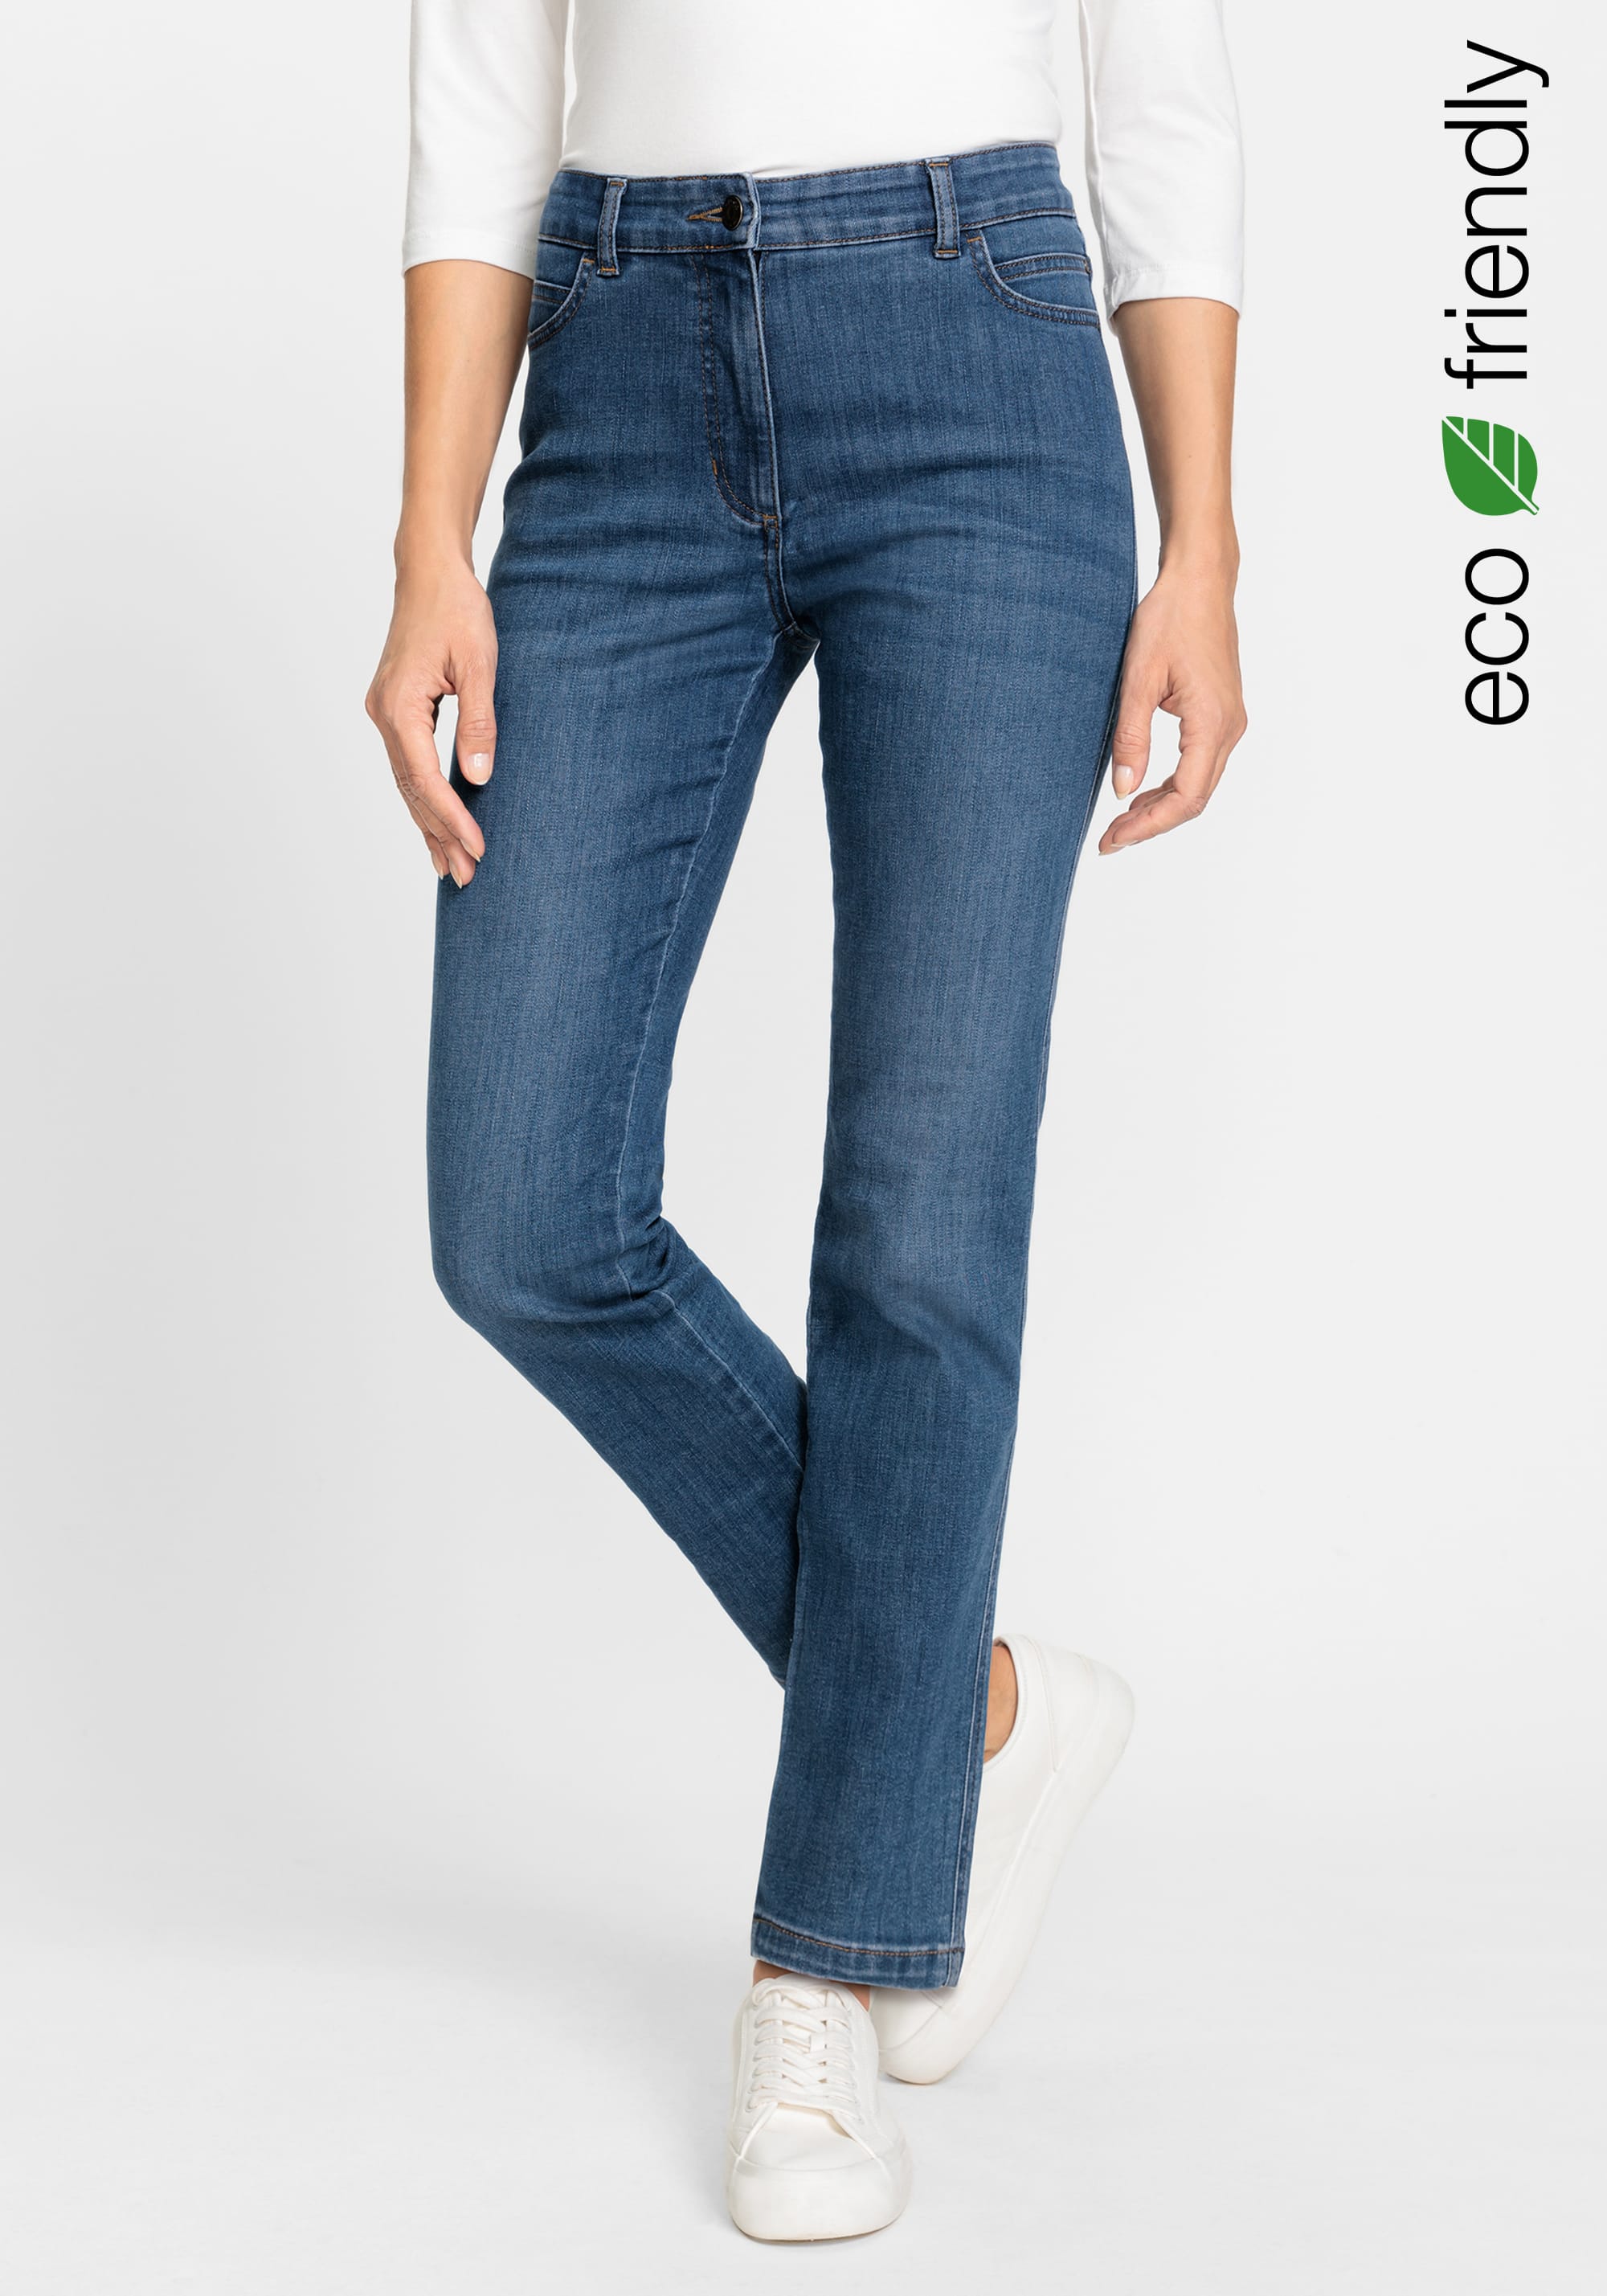 Women with Control Tall Elite Prime Stretch Denim Flare Pants 